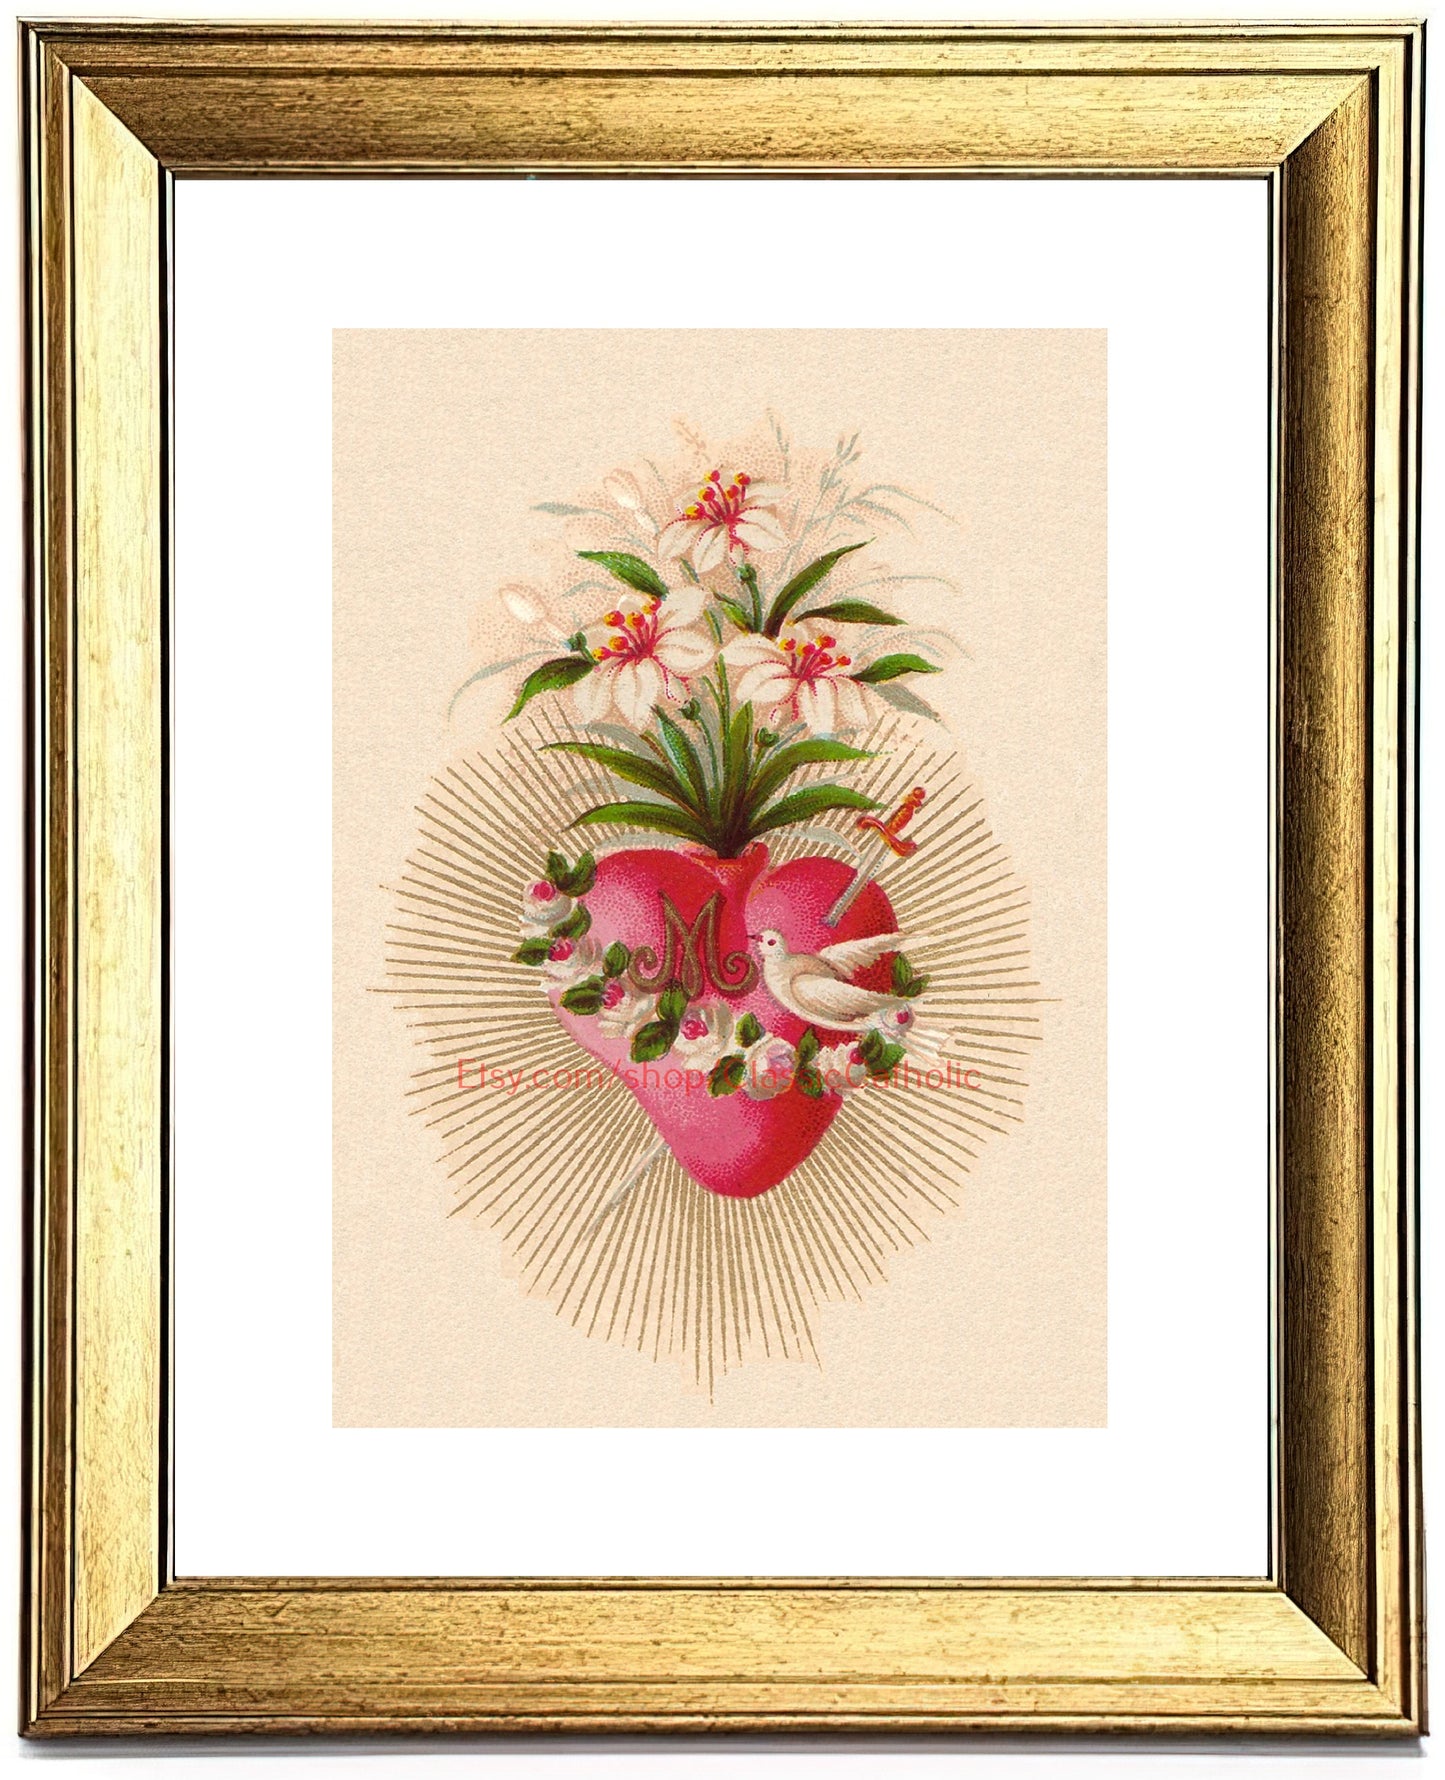 Immaculate Heart of Mary – based on a Vintage Holy Card – Catholic Art Print – Archival Quality